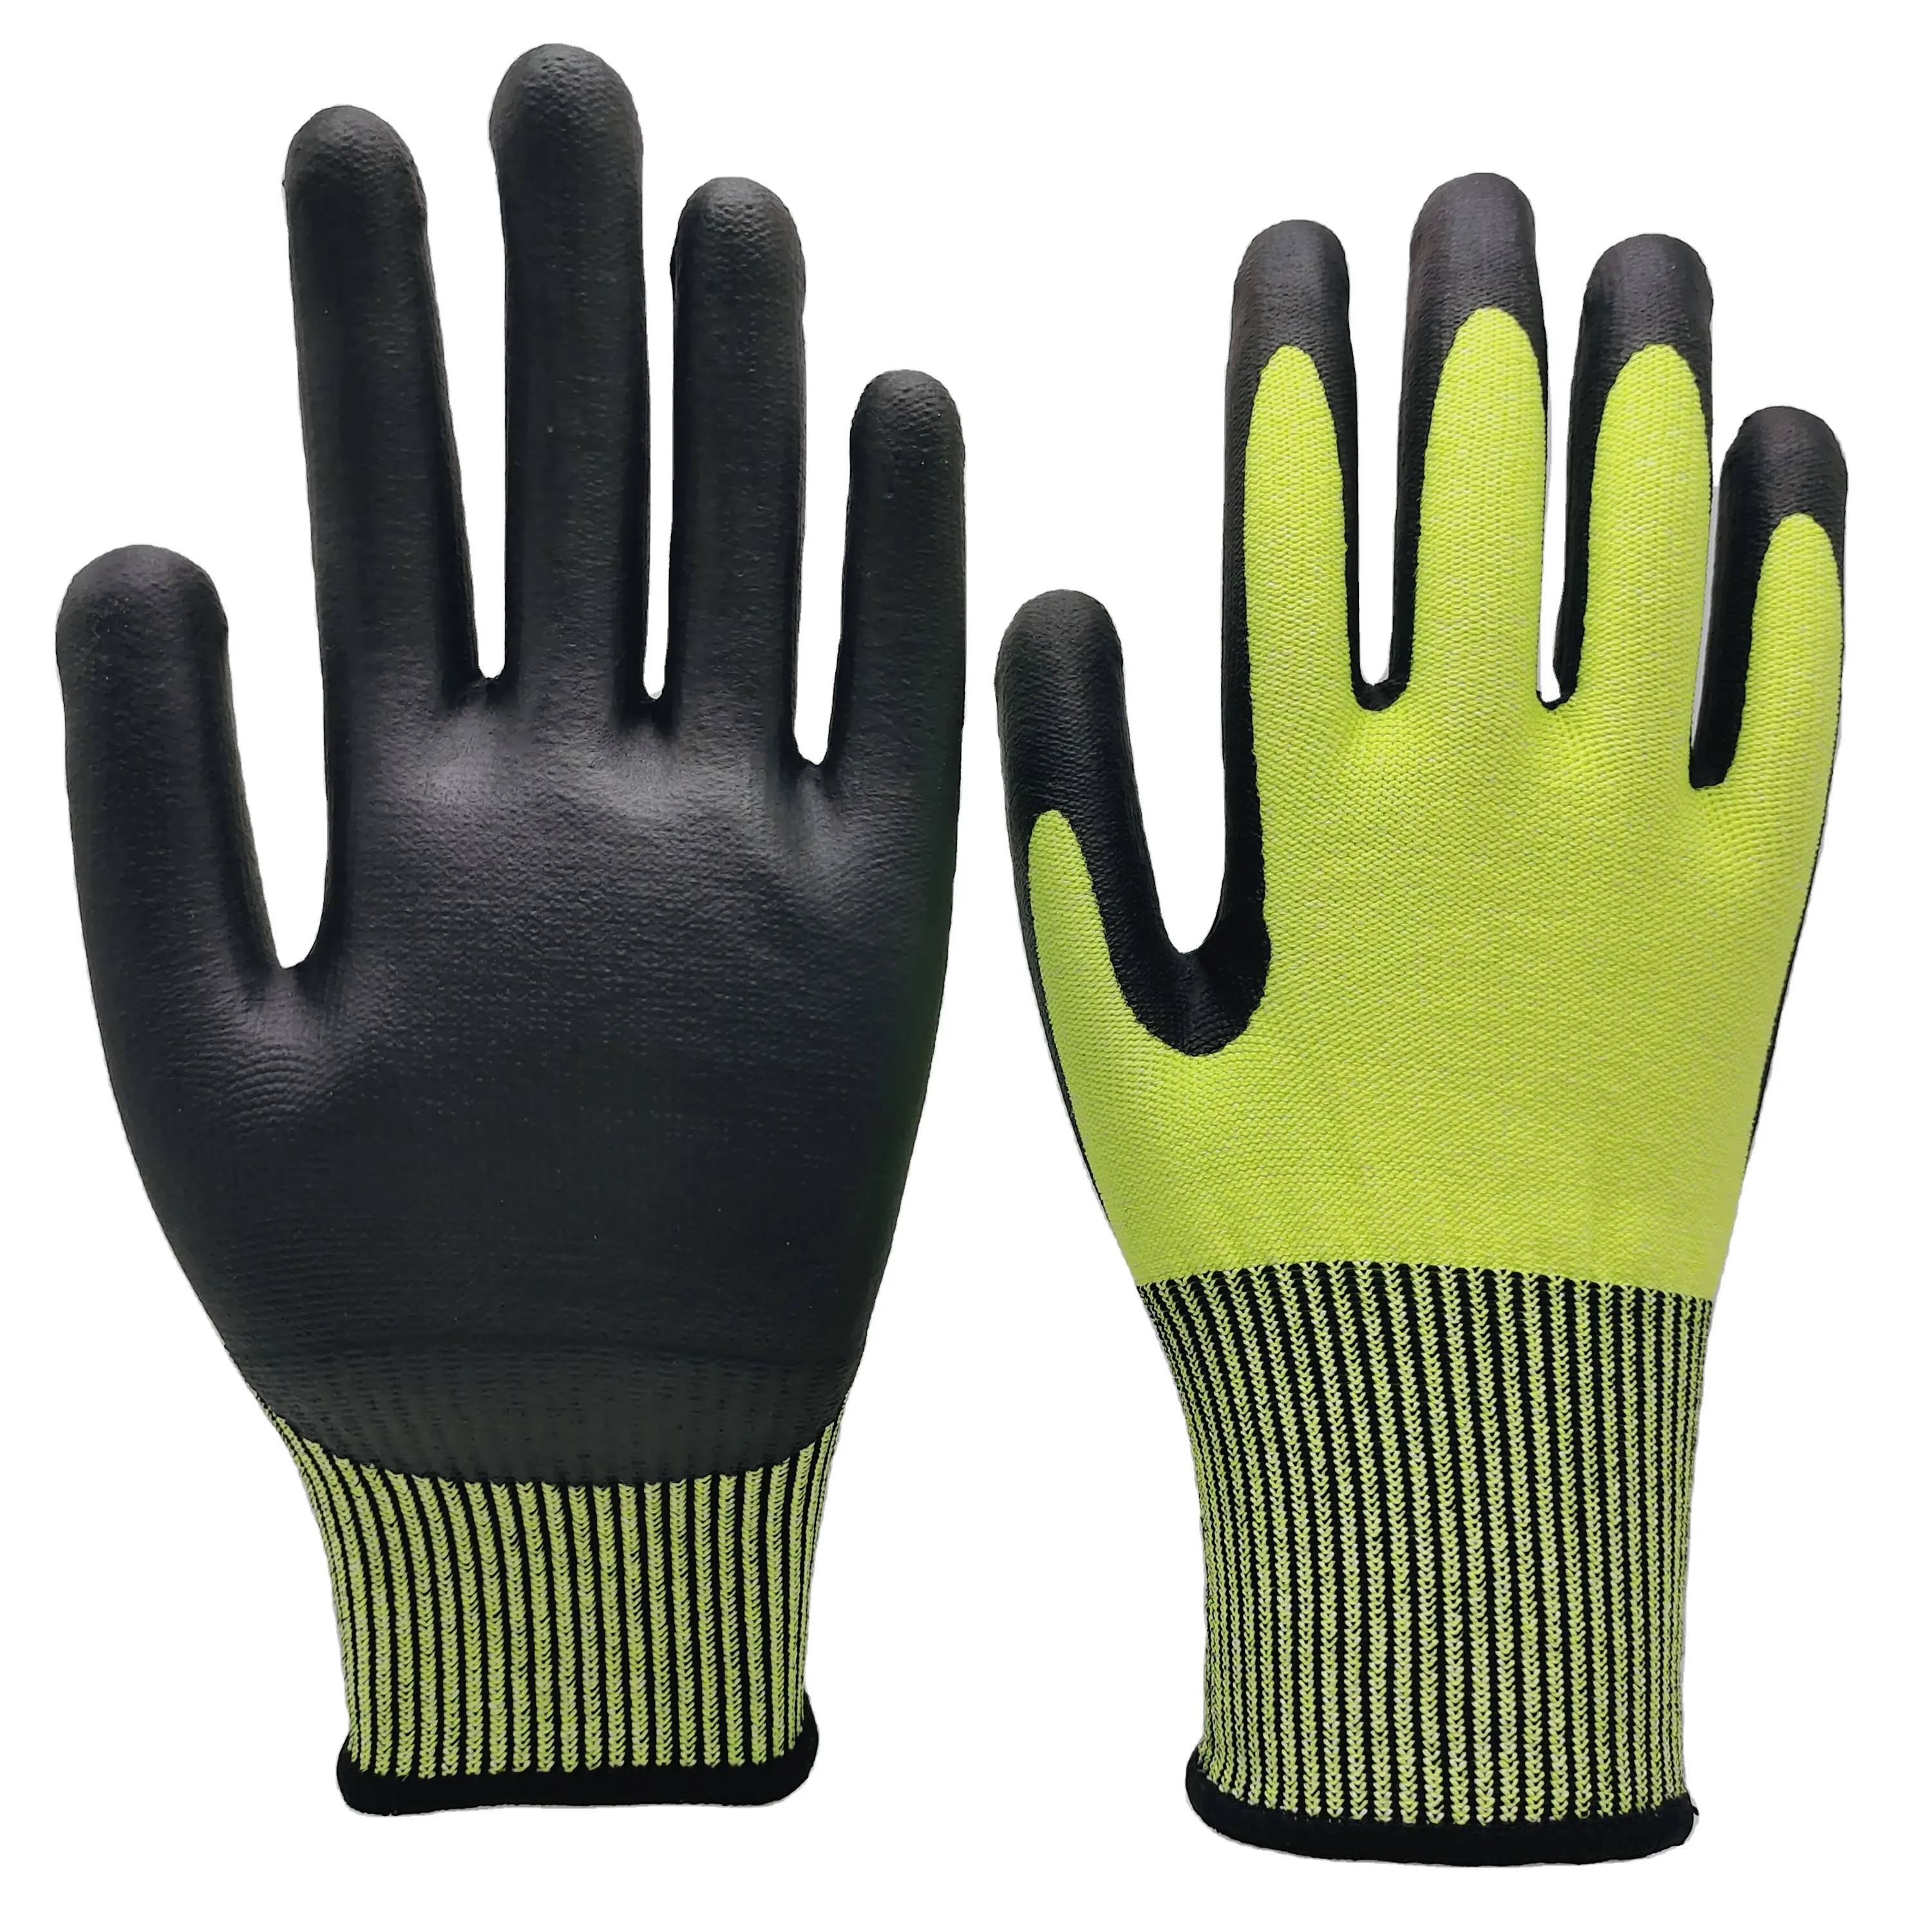 economic anti oil extra soft and breathable 15 gauge working gloves coated with micro foam on palm